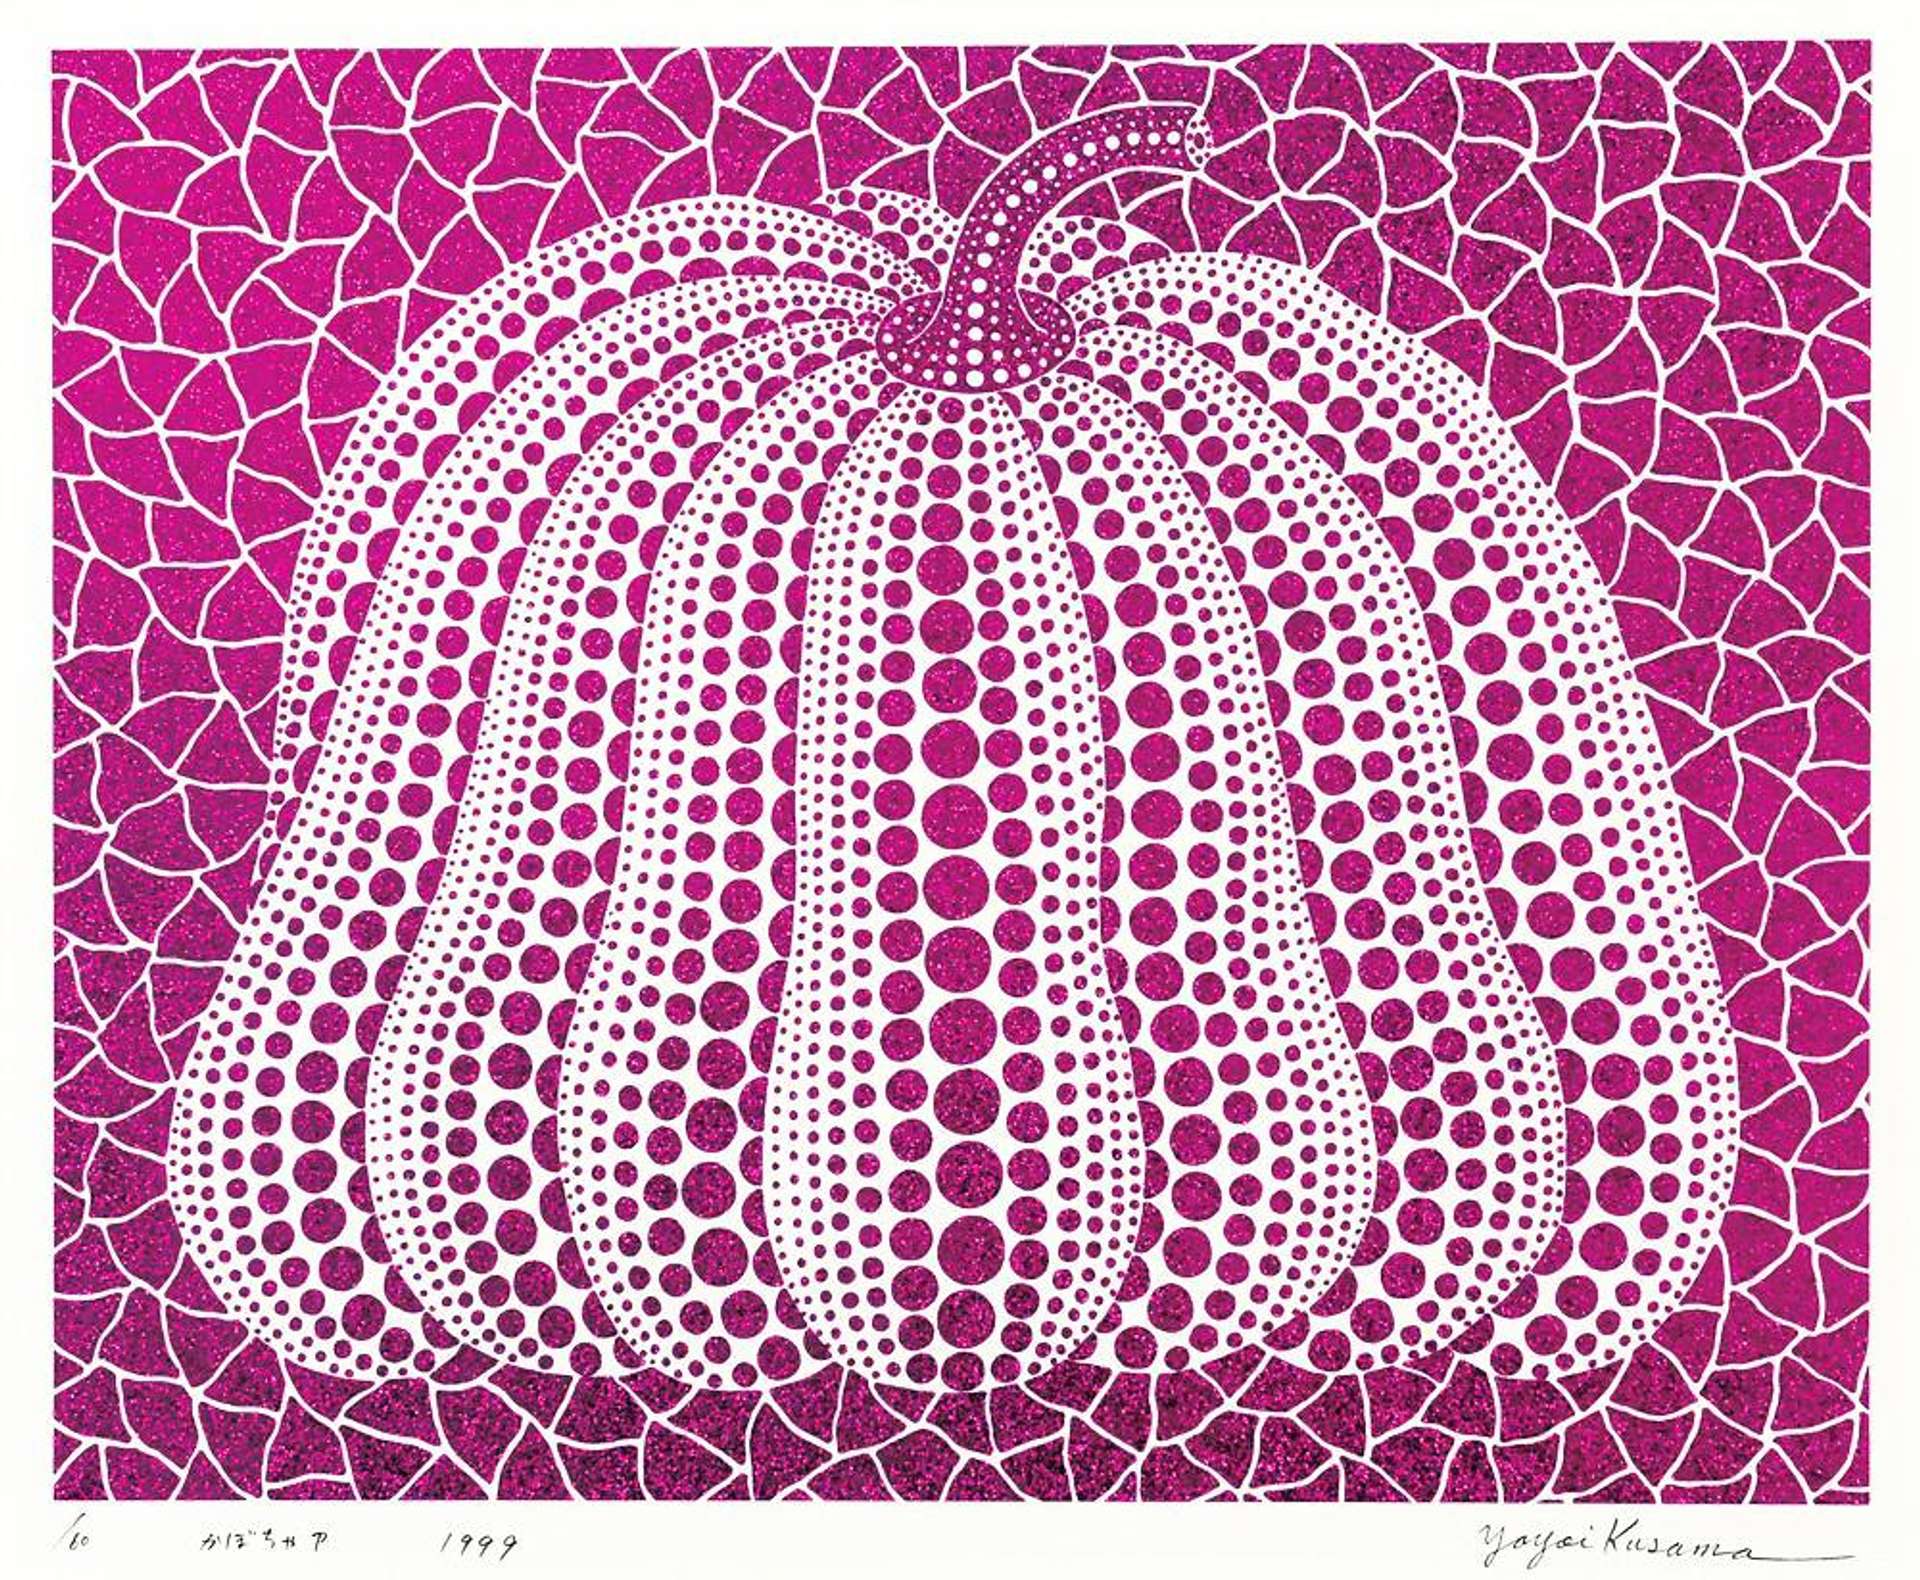 A pumpkin formed by a series of pink and white spots.